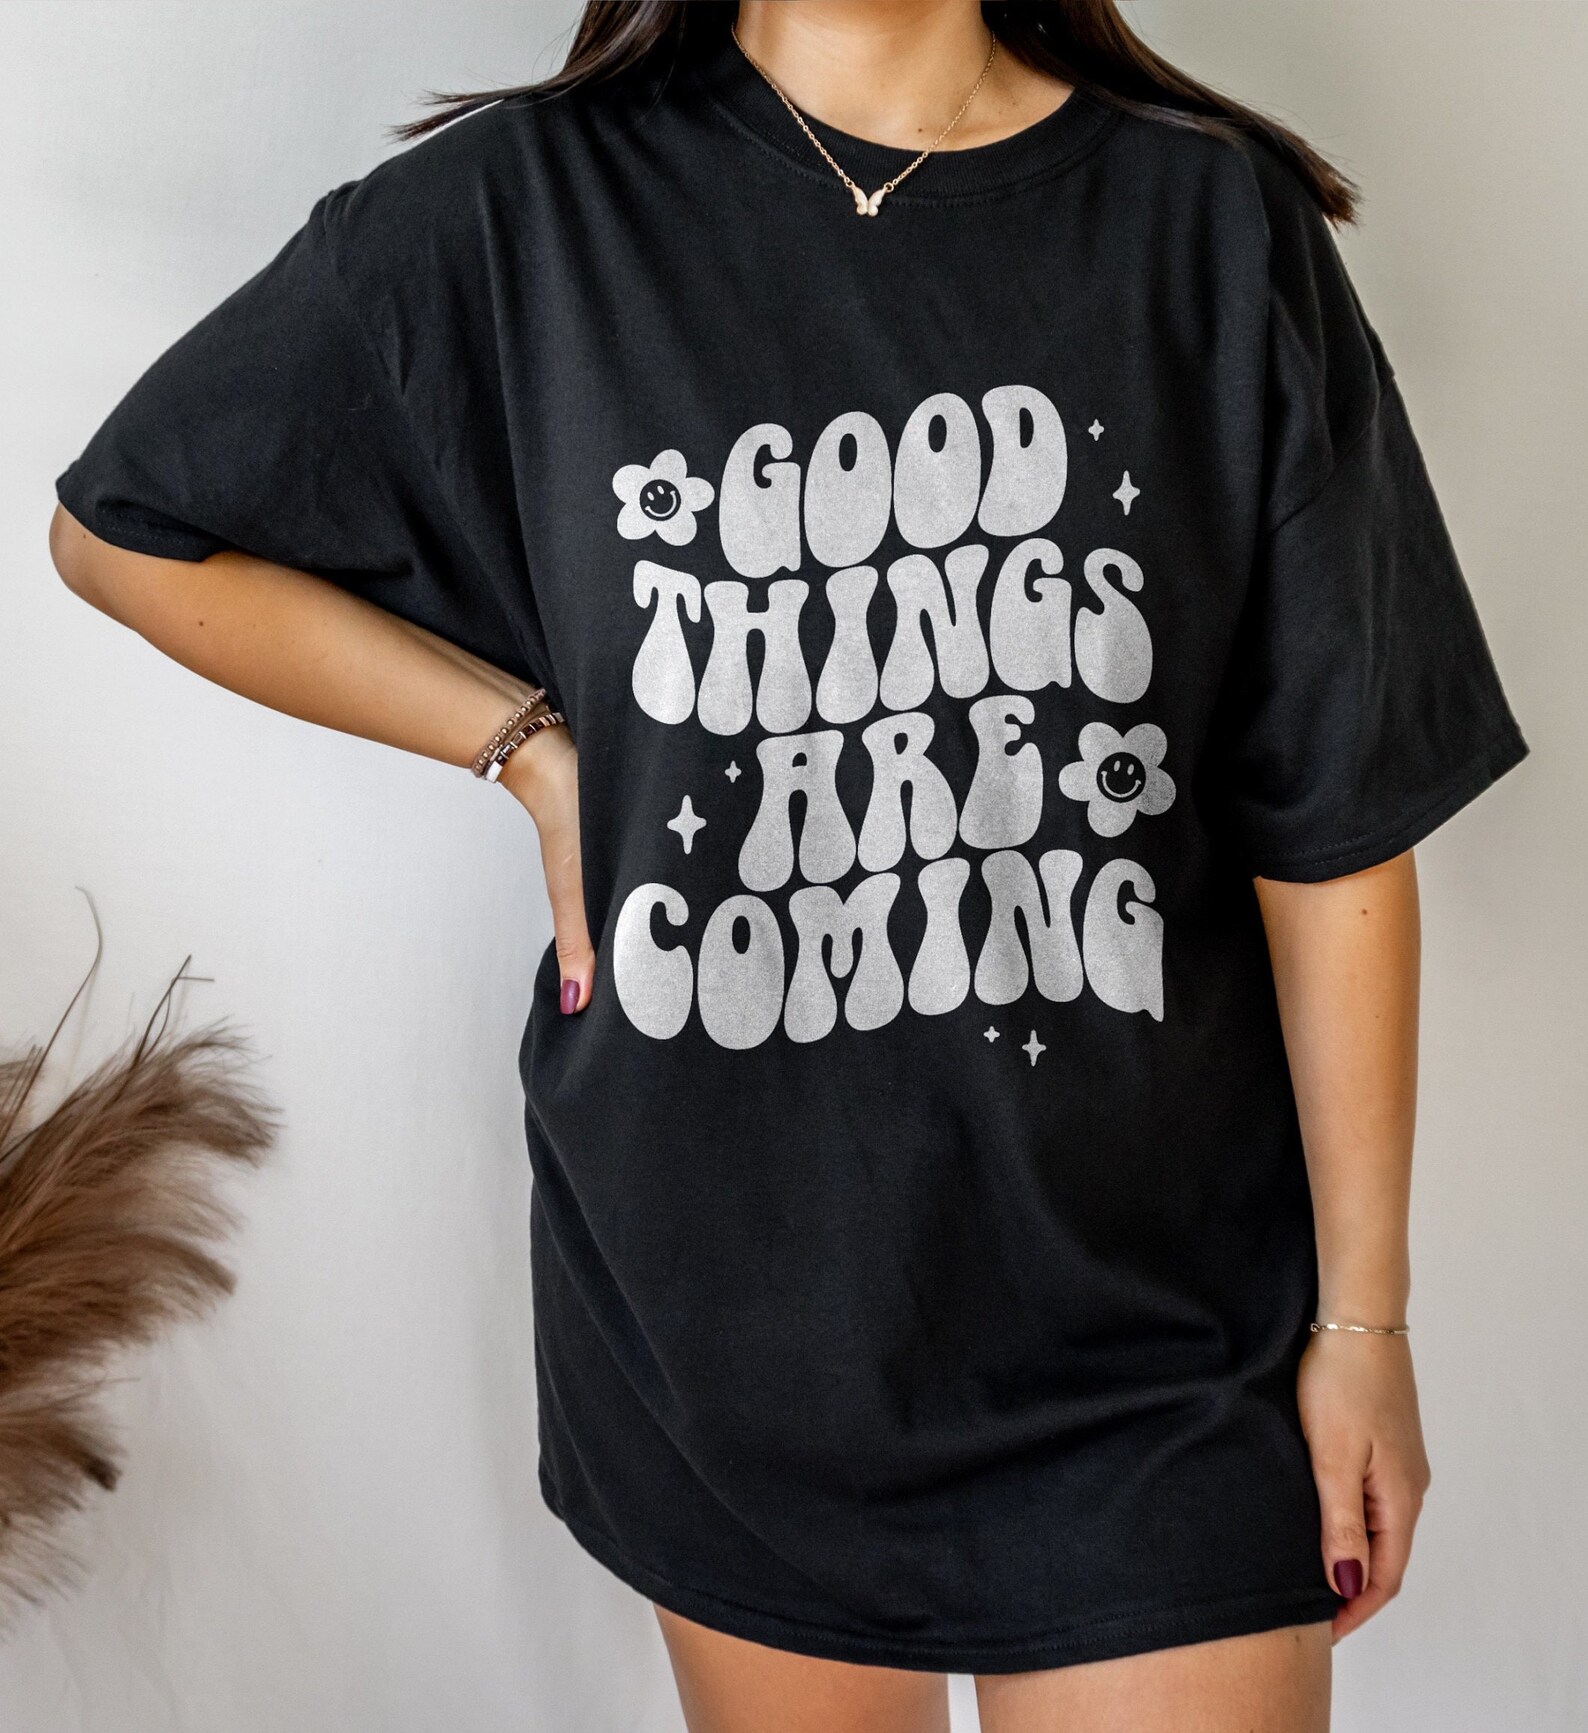 Good Things Are Coming Positive Shirt Aesthetic Clothes | Etsy